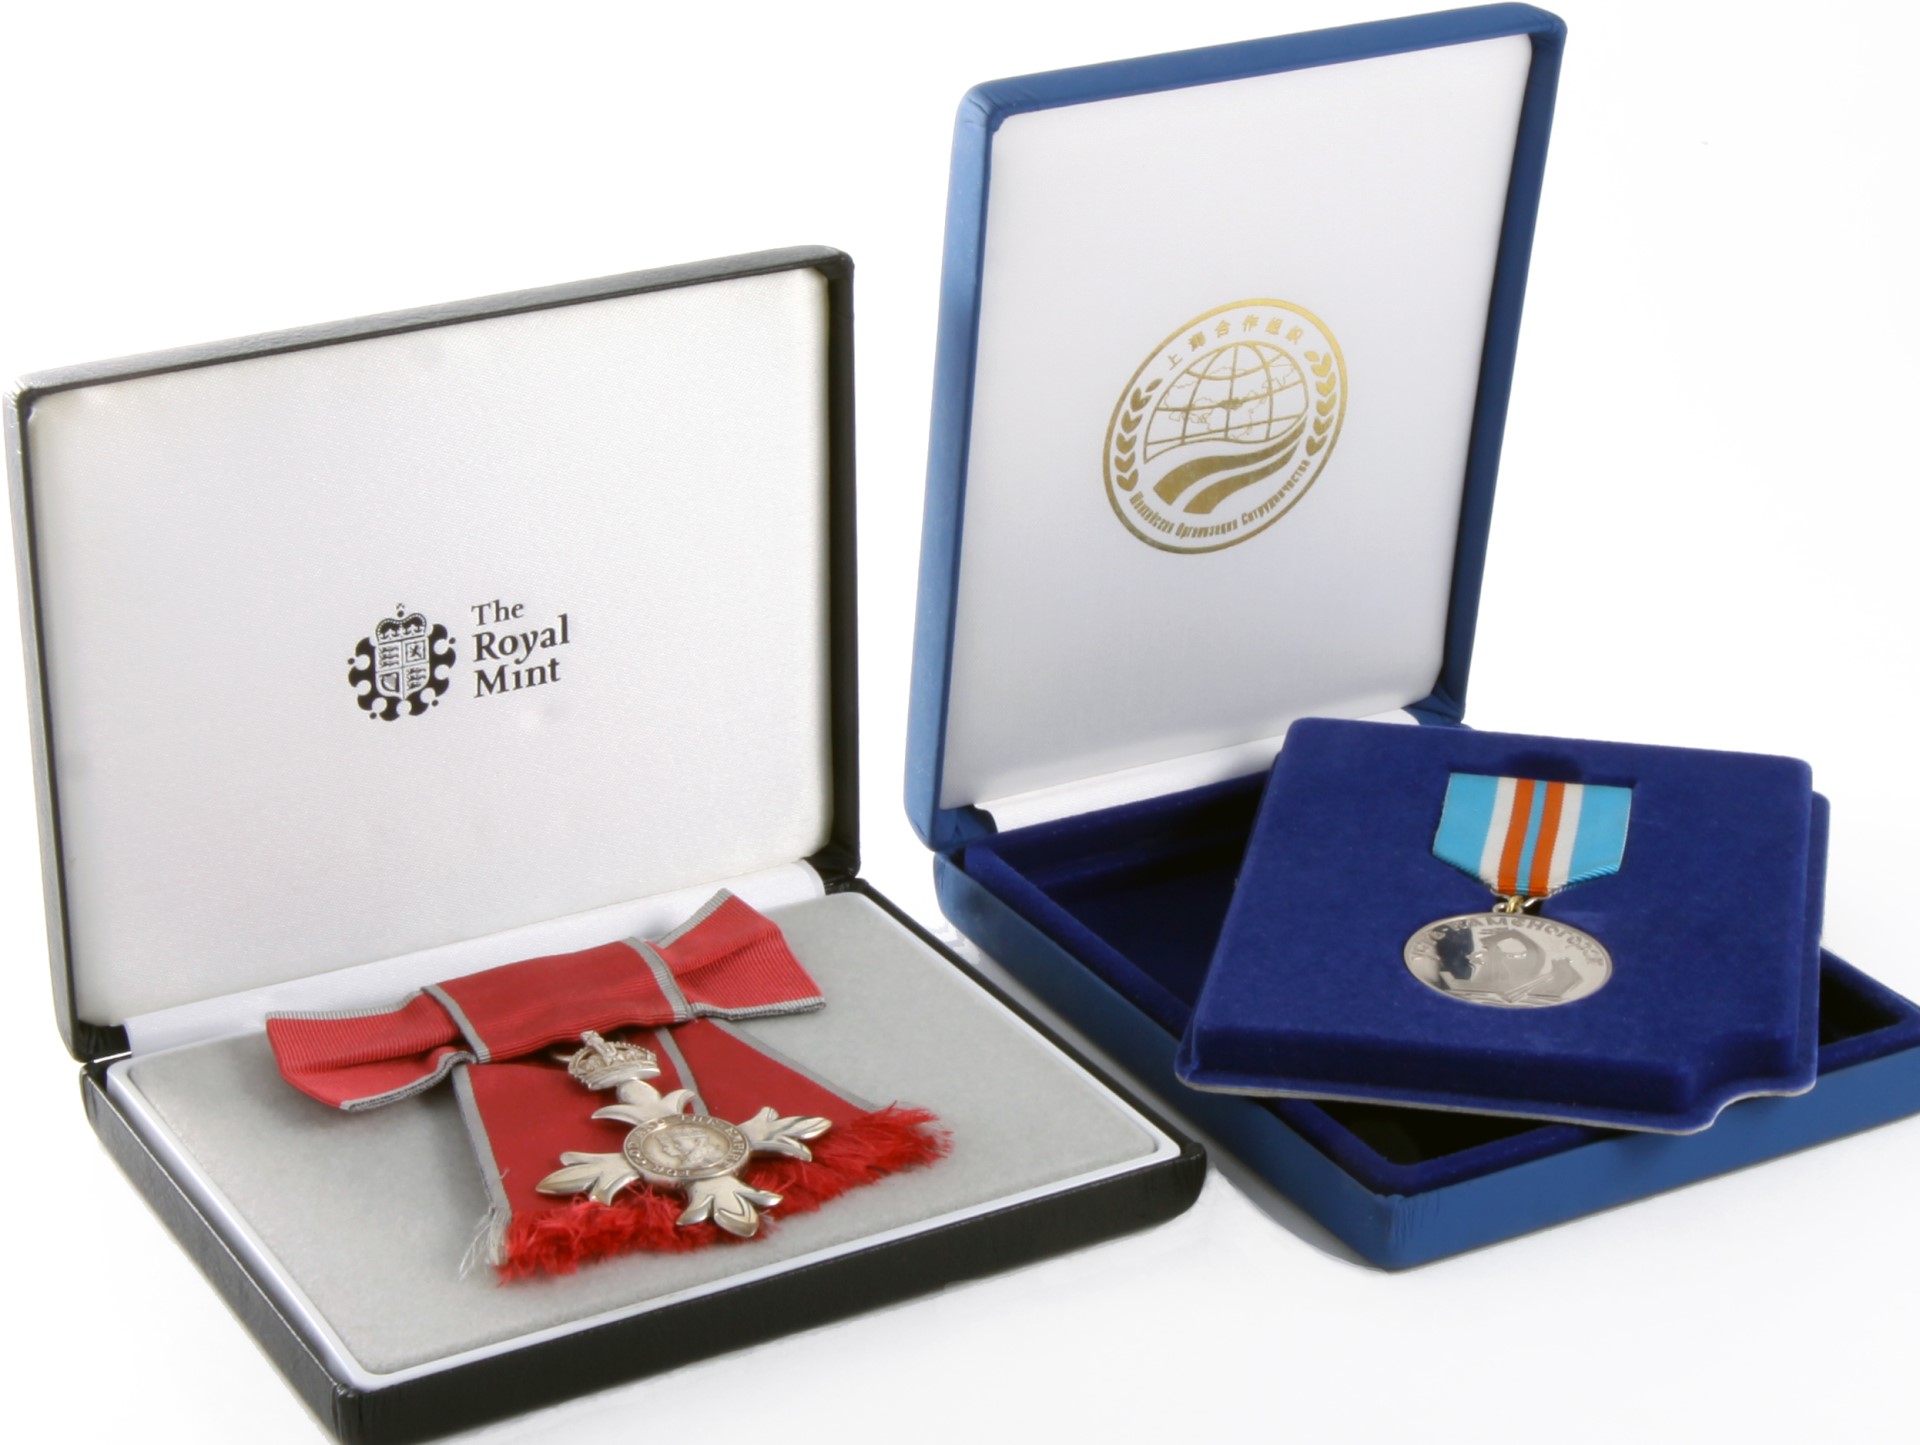 Medal Boxes